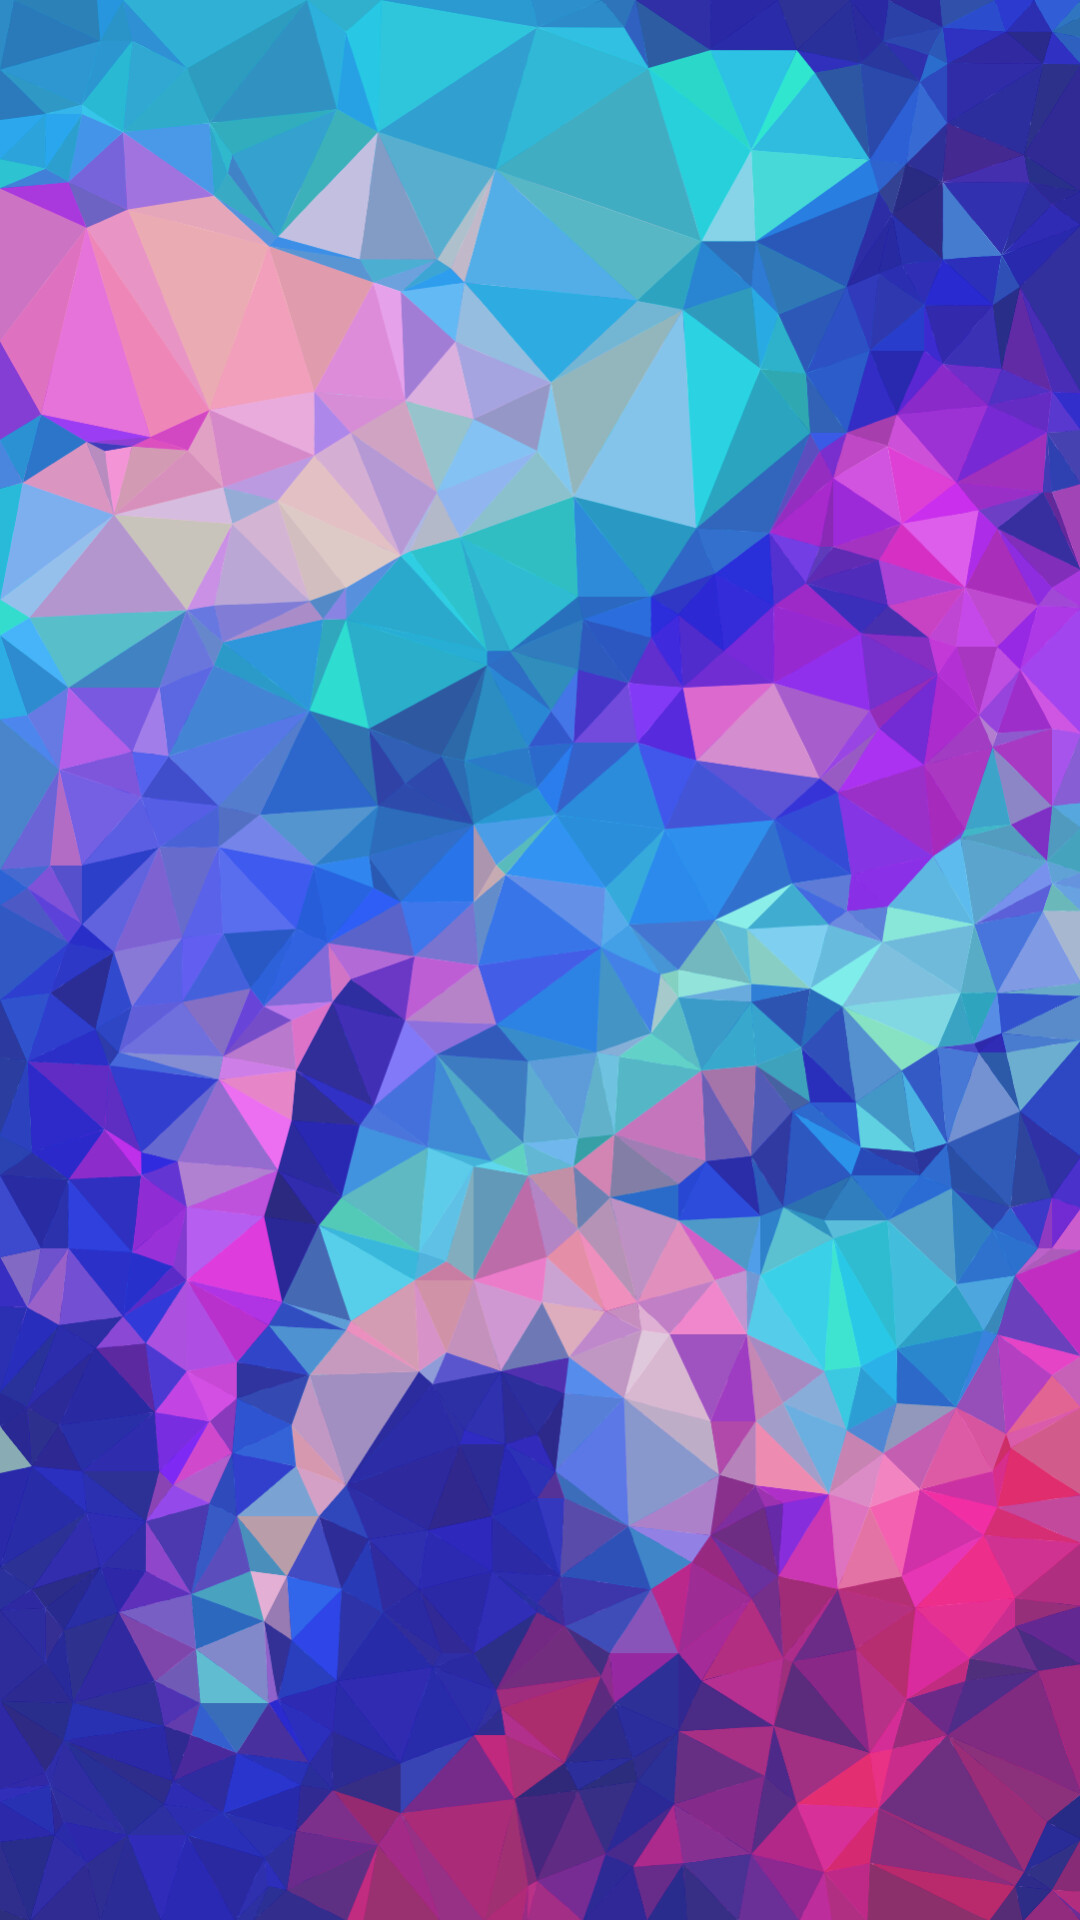 Geometric Abstract: Watercolor polygonal, Triangle, Colorful, Obtuse angles. 1080x1920 Full HD Background.